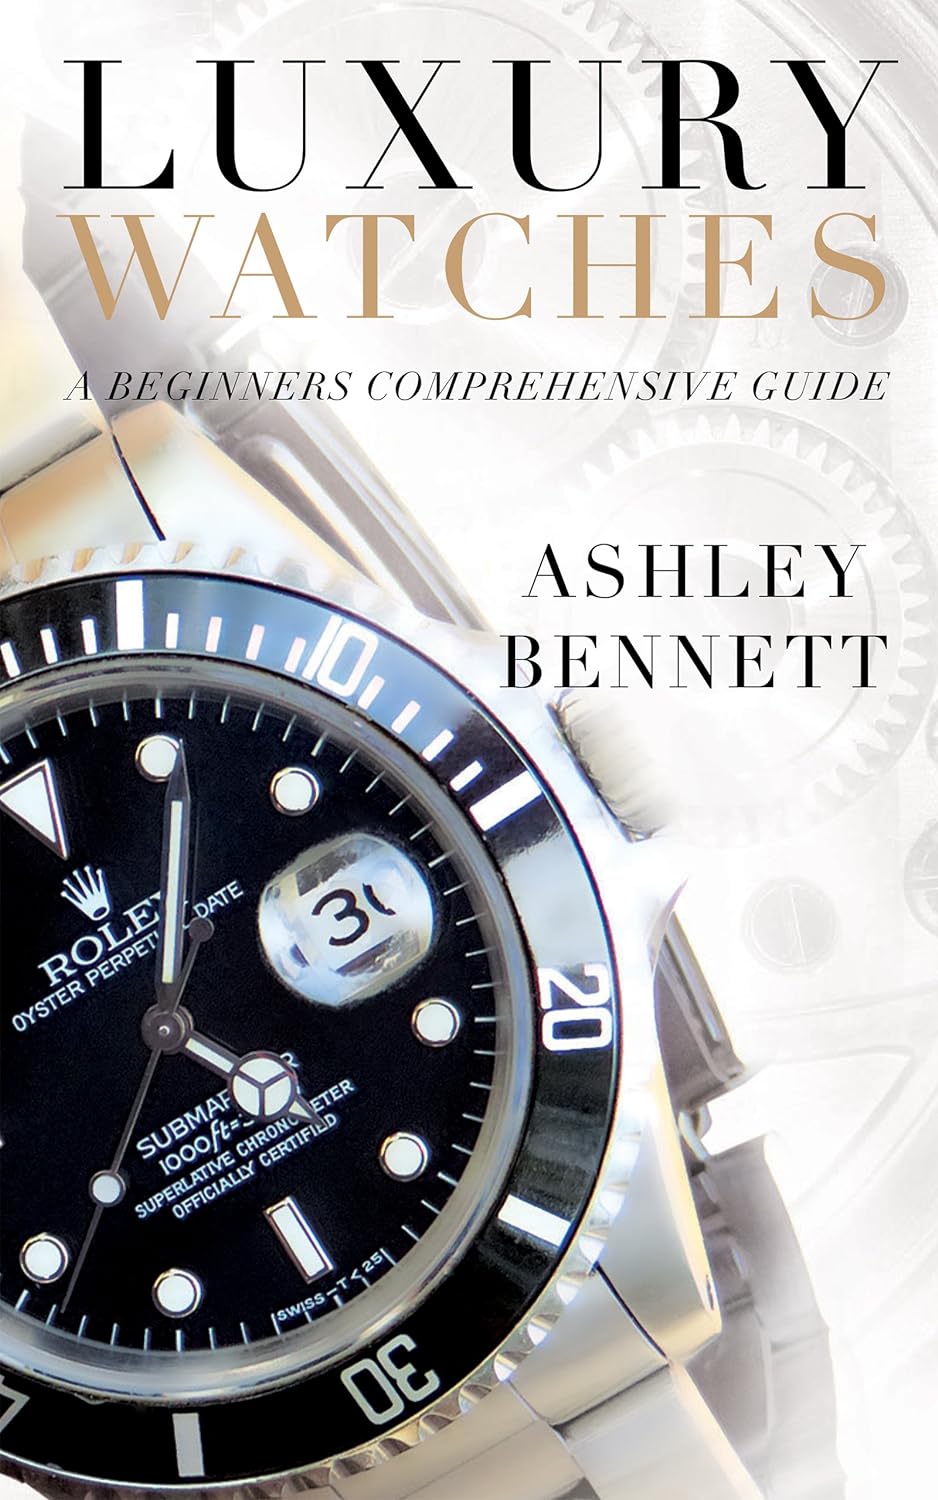 [eBook]Luxury Watches: A Beginners Comprehensive Guide